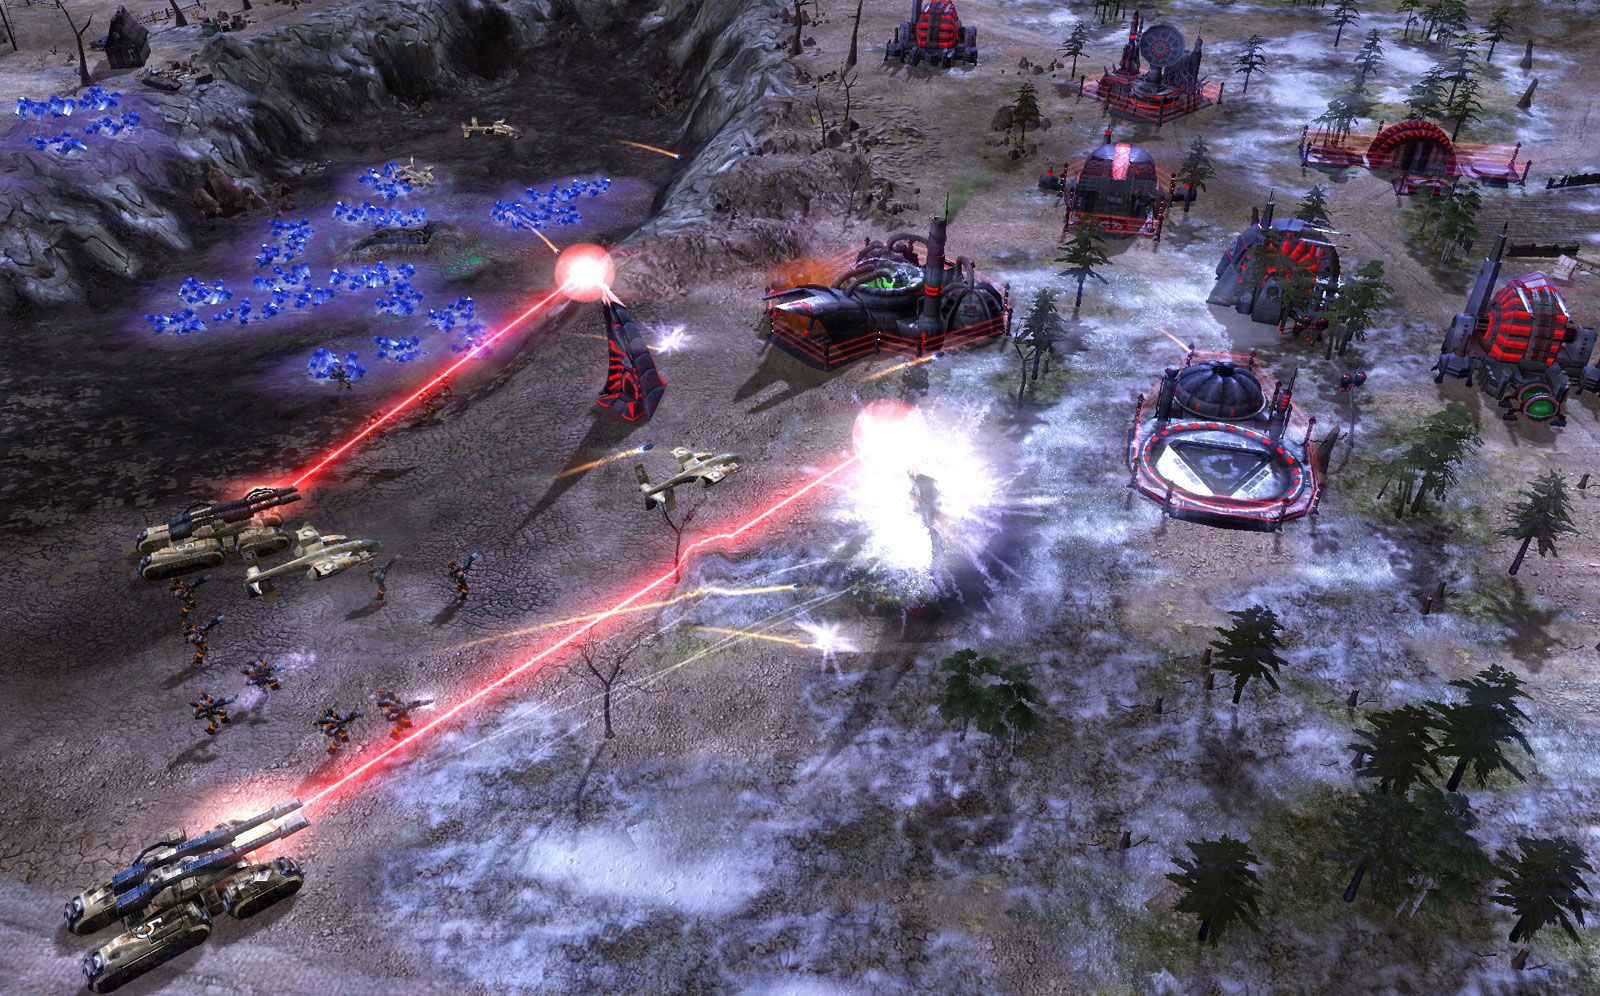 Command. Command & Conquer 3: Kane’s Wrath. Command Conquer 3 Kane s Wrath. Command & Conquer 3: Tiberium Wars: ярость Кейна. Command & Conquer 3: ярость Кейна Кейн.